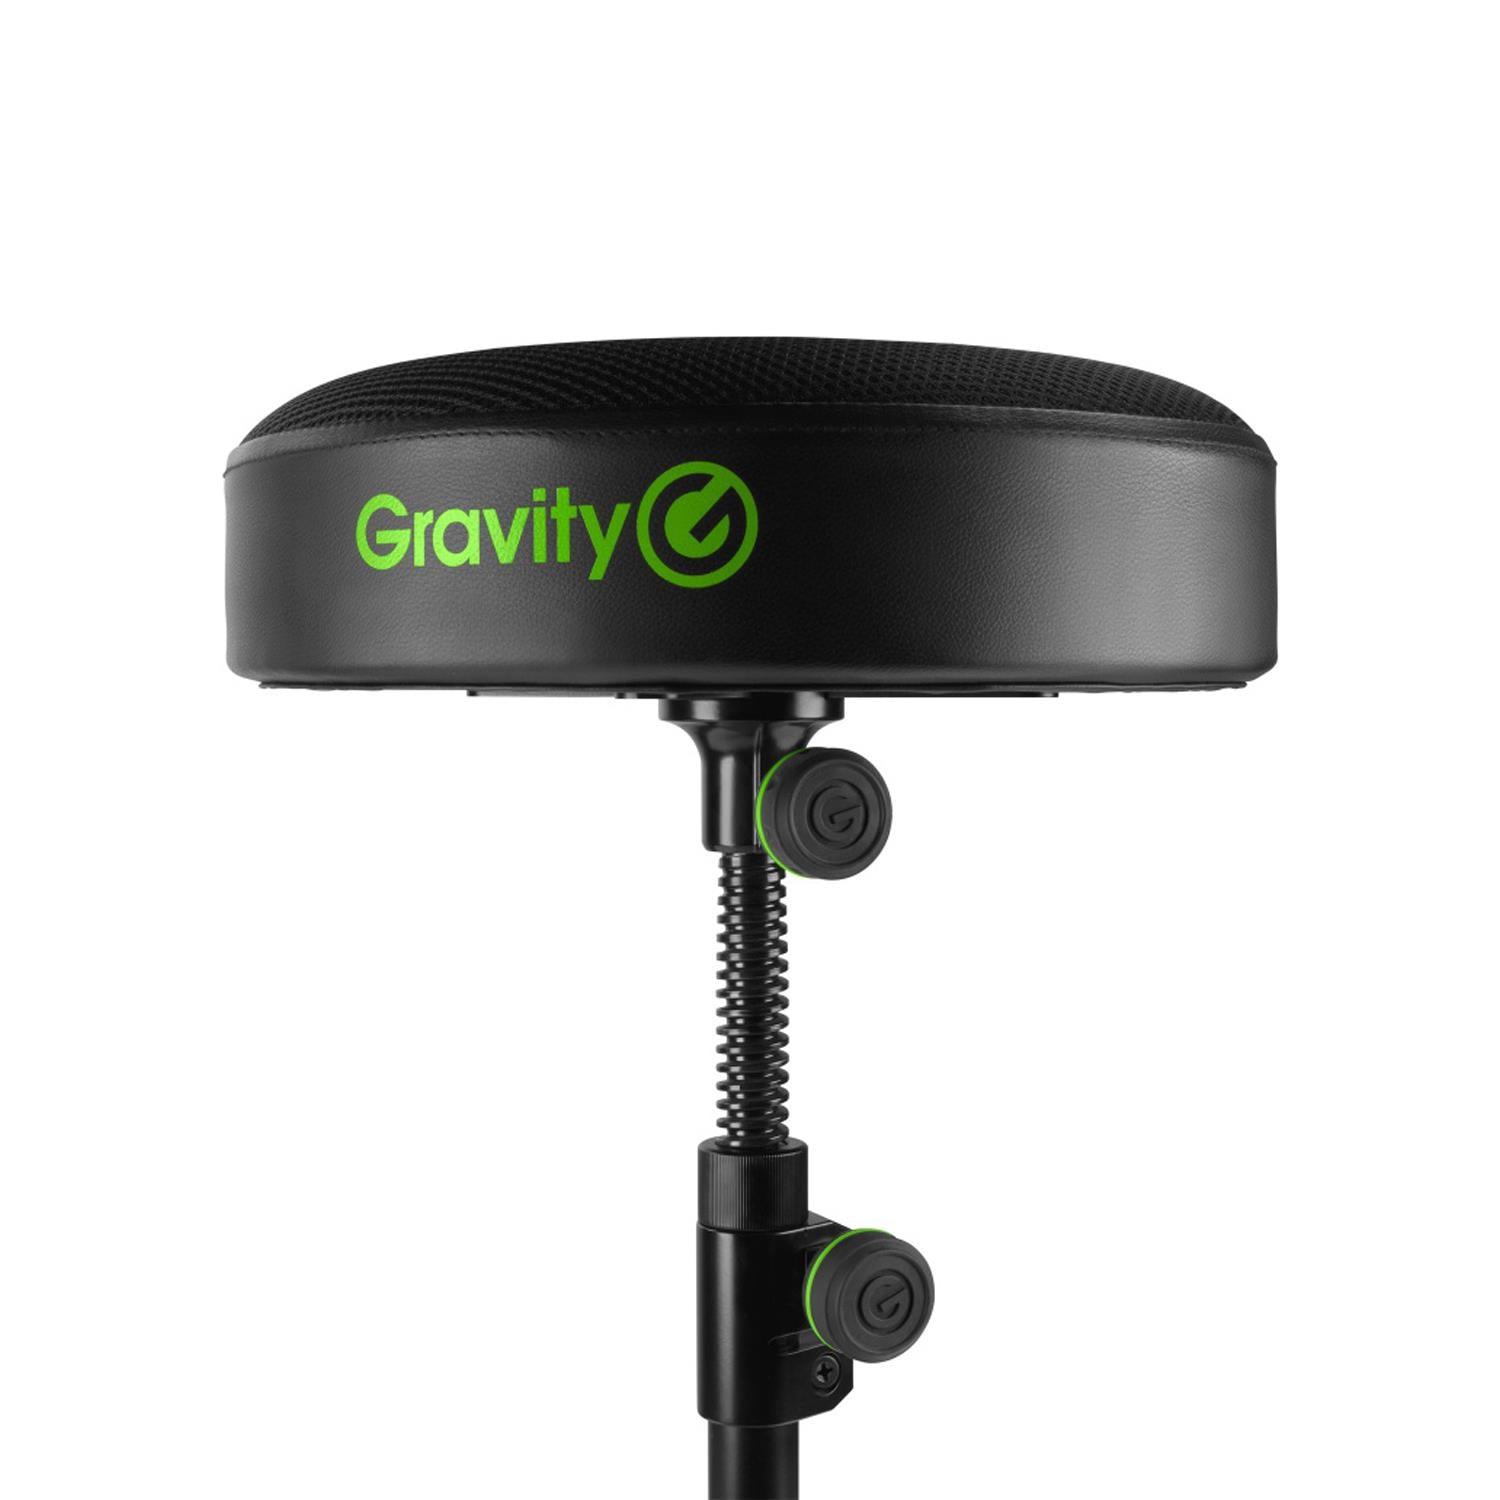 Gravity FD SEAT 1 Round Foldable Adjustable Musicians Stool - DY Pro Audio